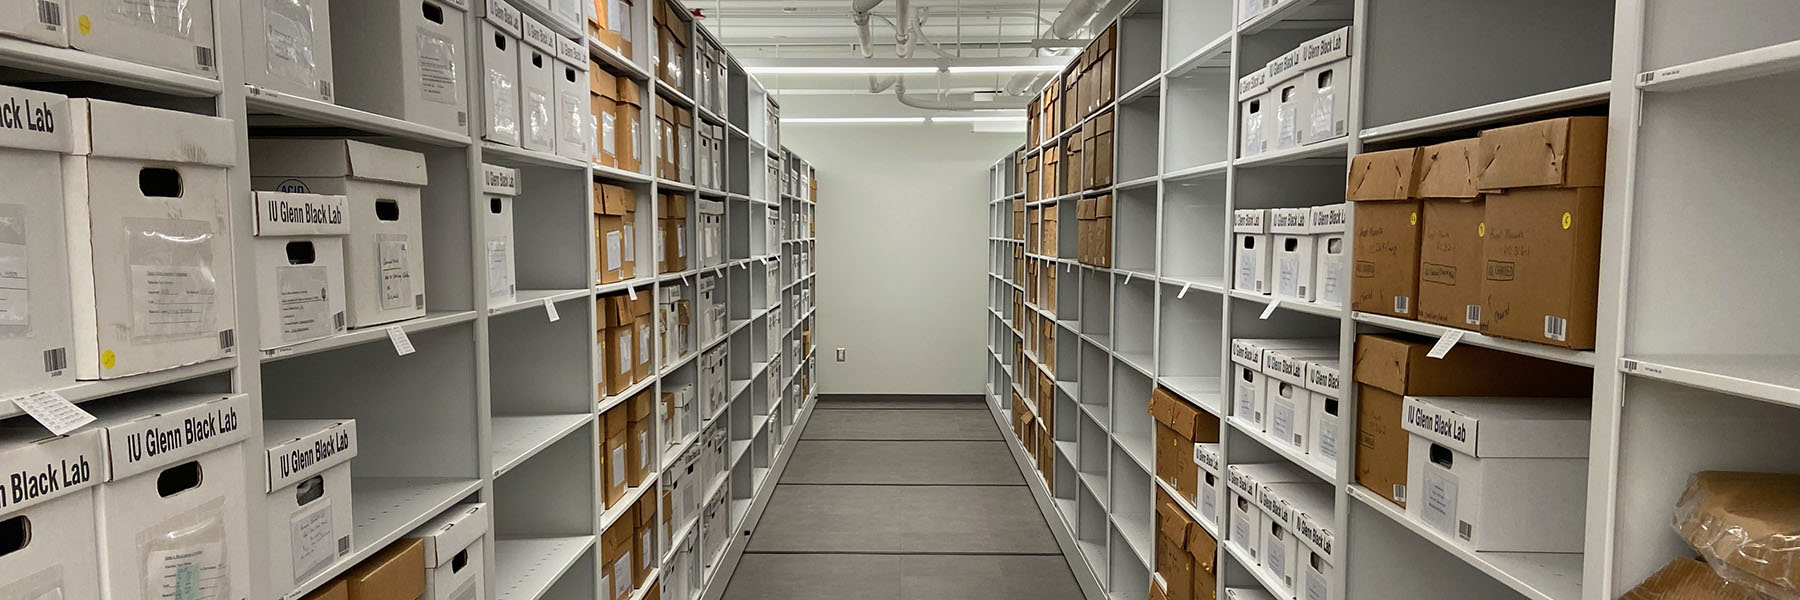 A view of a set of shelves filled with white and brown labeled boxes 